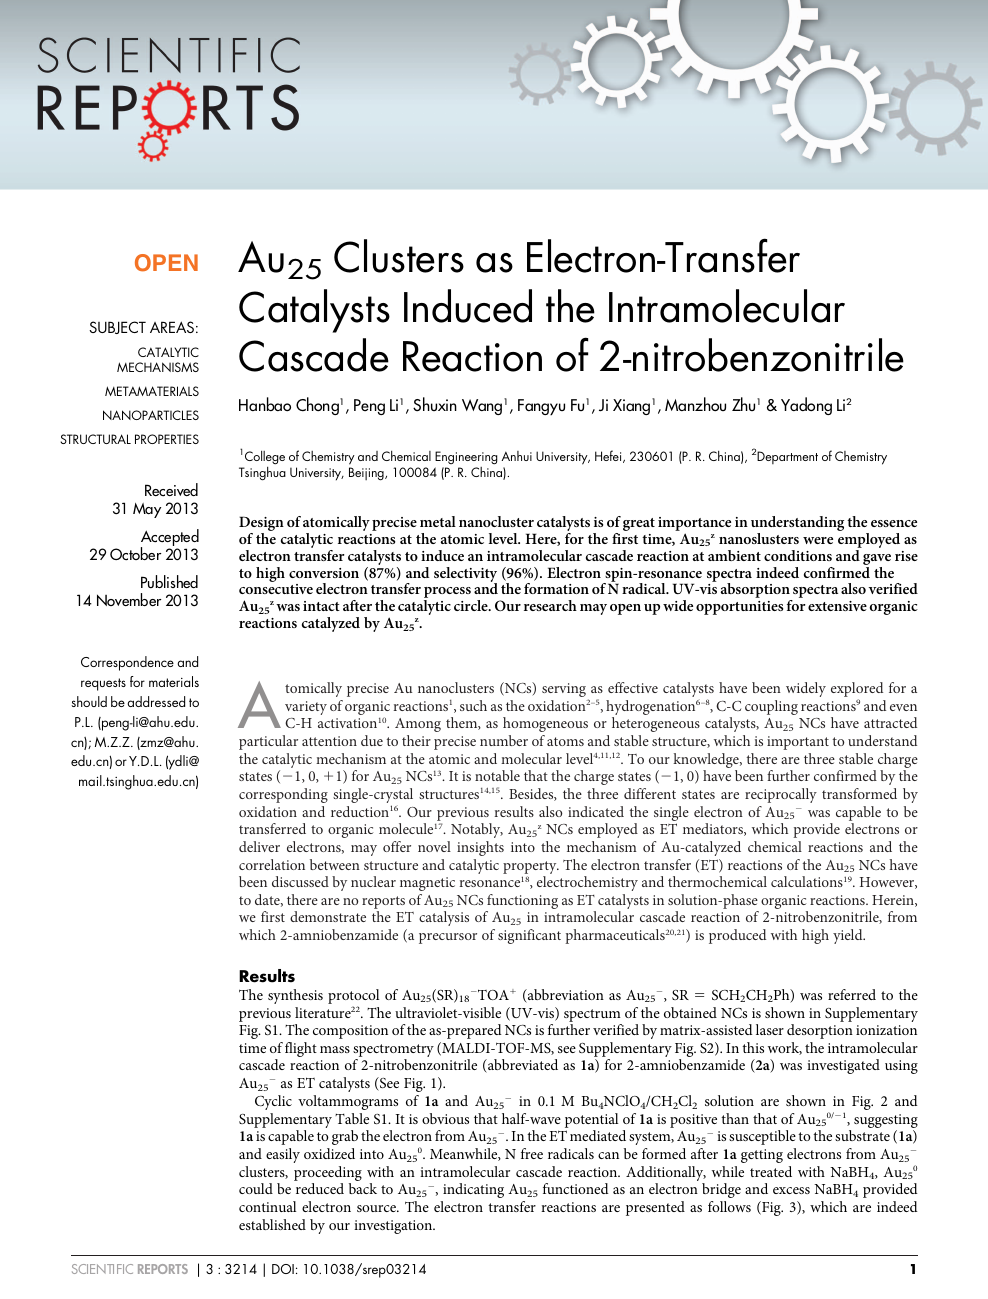 Au25 Clusters As Electron Transfer Catalysts Induced The Intramolecular Cascade Reaction Of 2 Nitrobenzonitrile Topic Of Research Paper In Chemical Sciences Download Scholarly Article Pdf And Read For Free On Cyberleninka Open Science